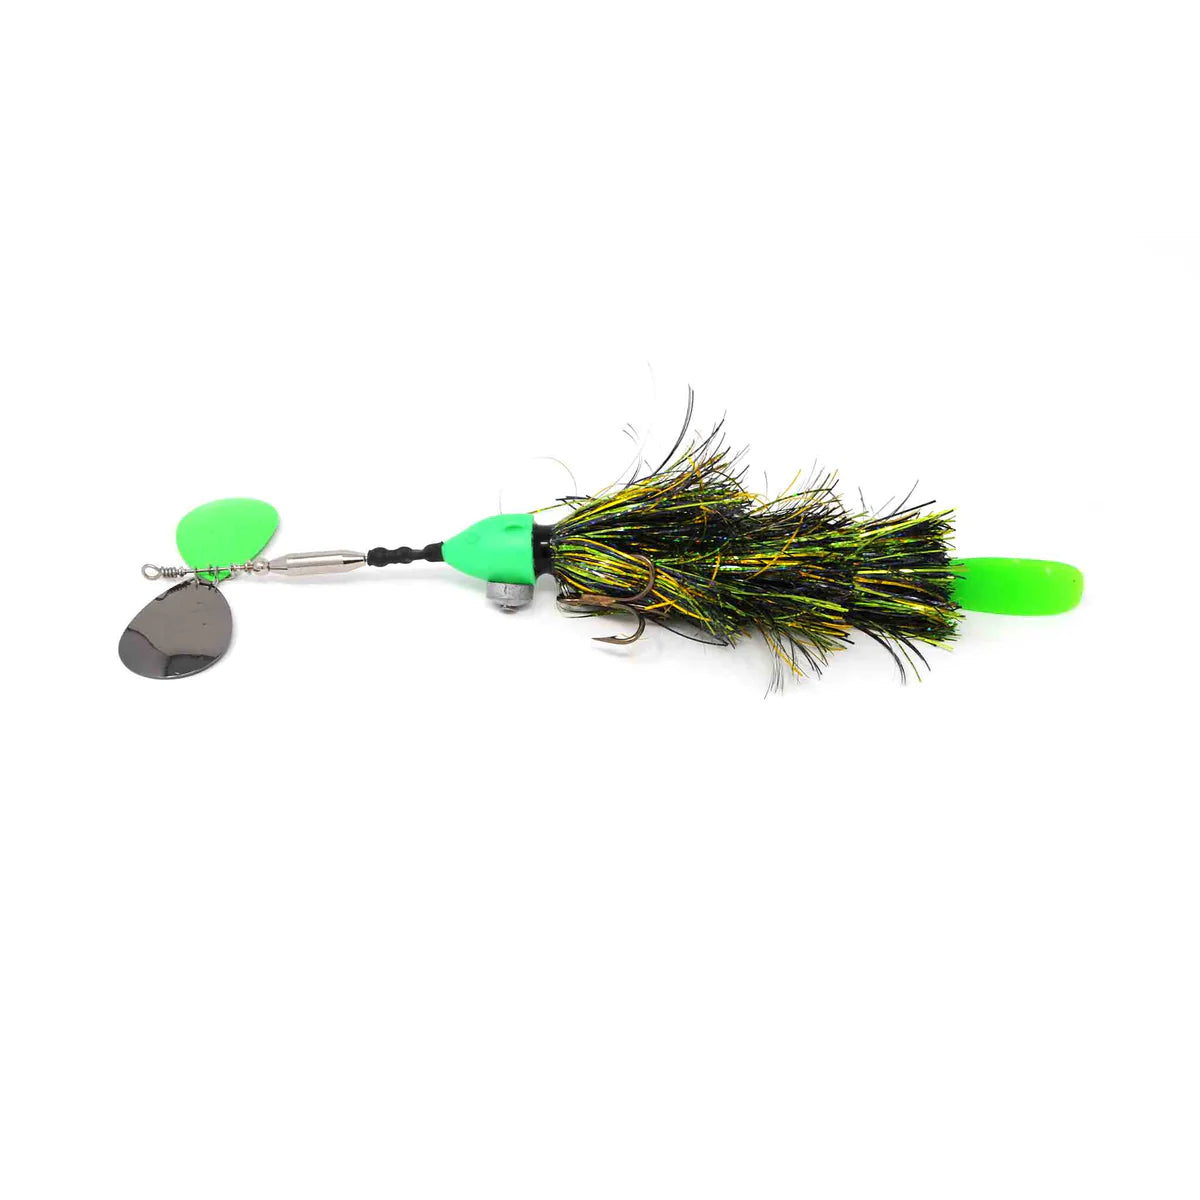 The 3.5” Little Fuzzy is a gem for flipping grass, wood or utilizing it as  a jig trailer. #beaverbait #fishinglures #lures #basslures…